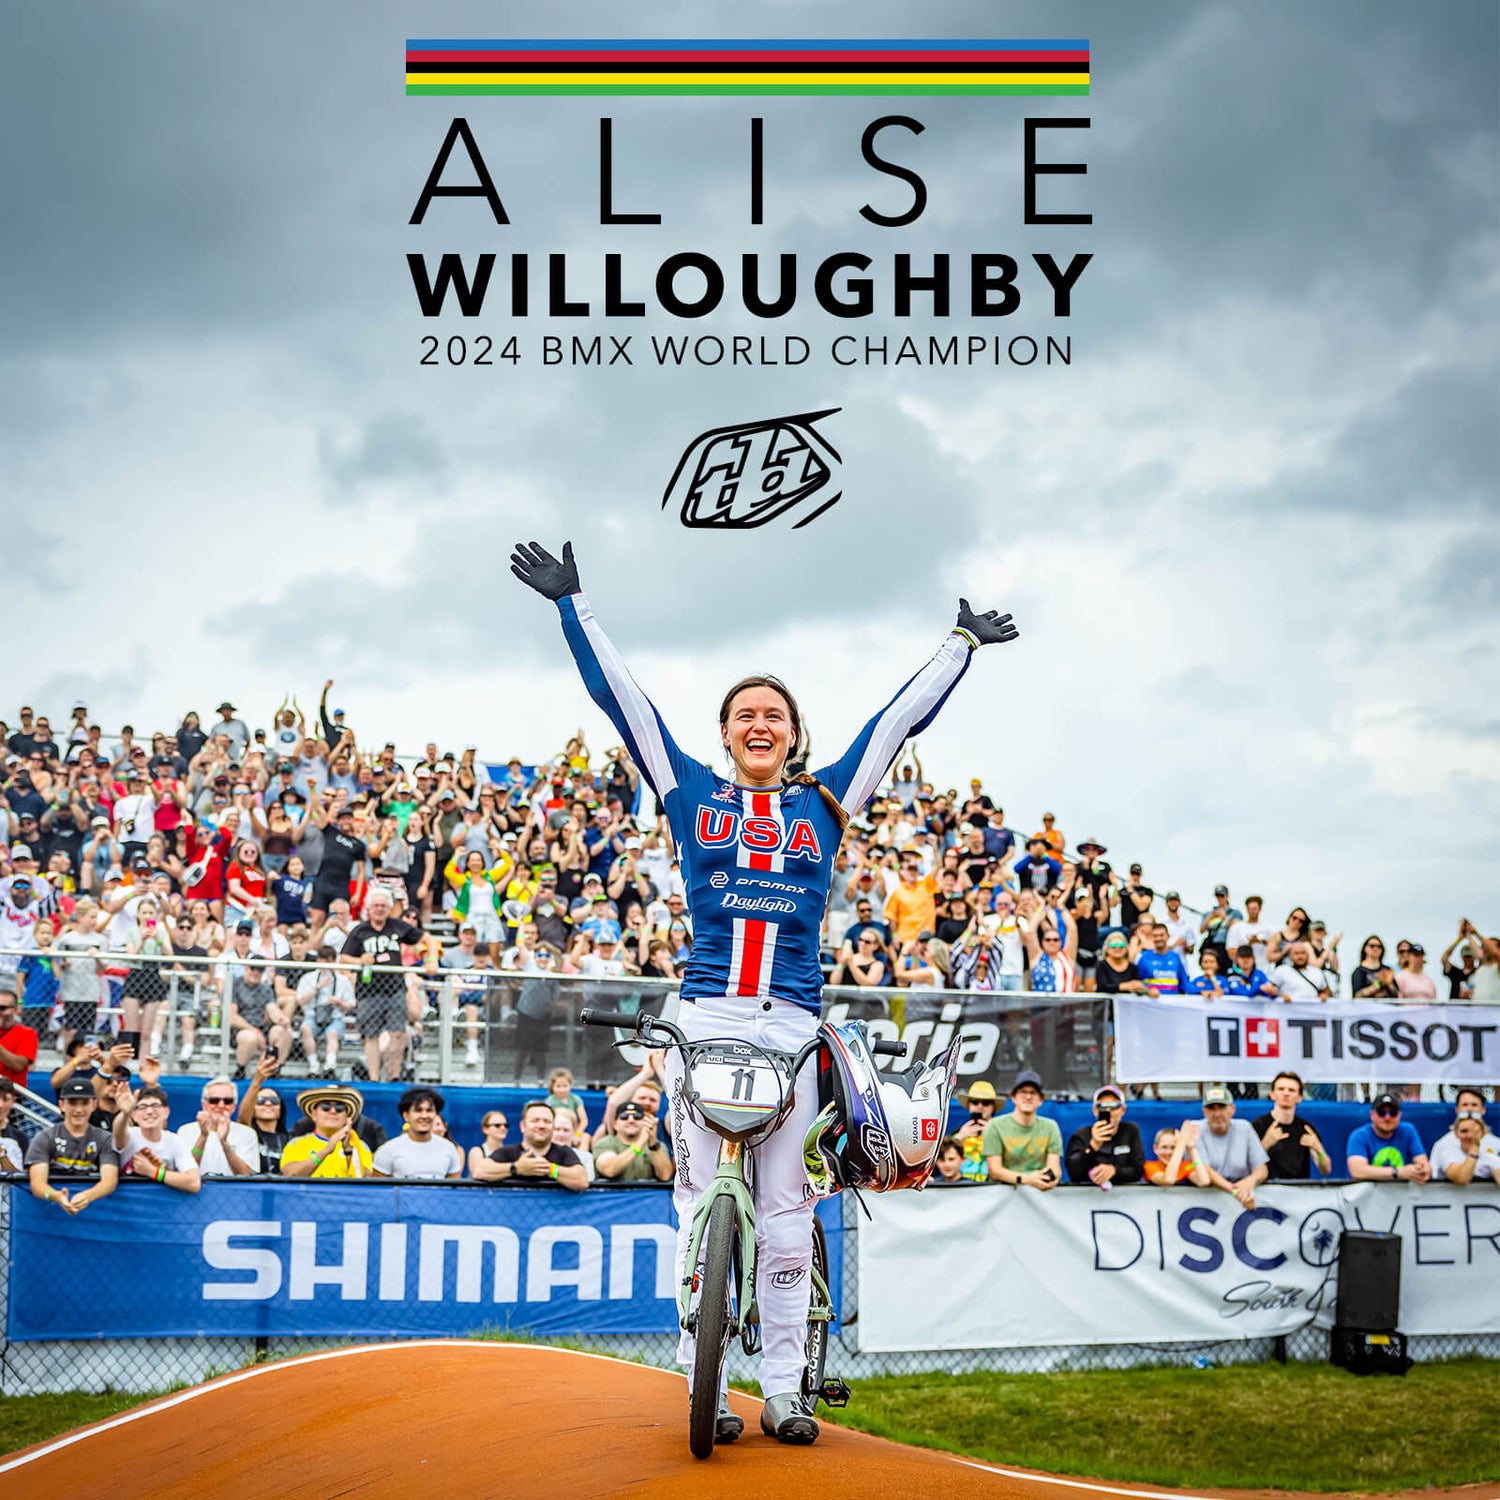 Alise Post is your 2024 BMX World Champion